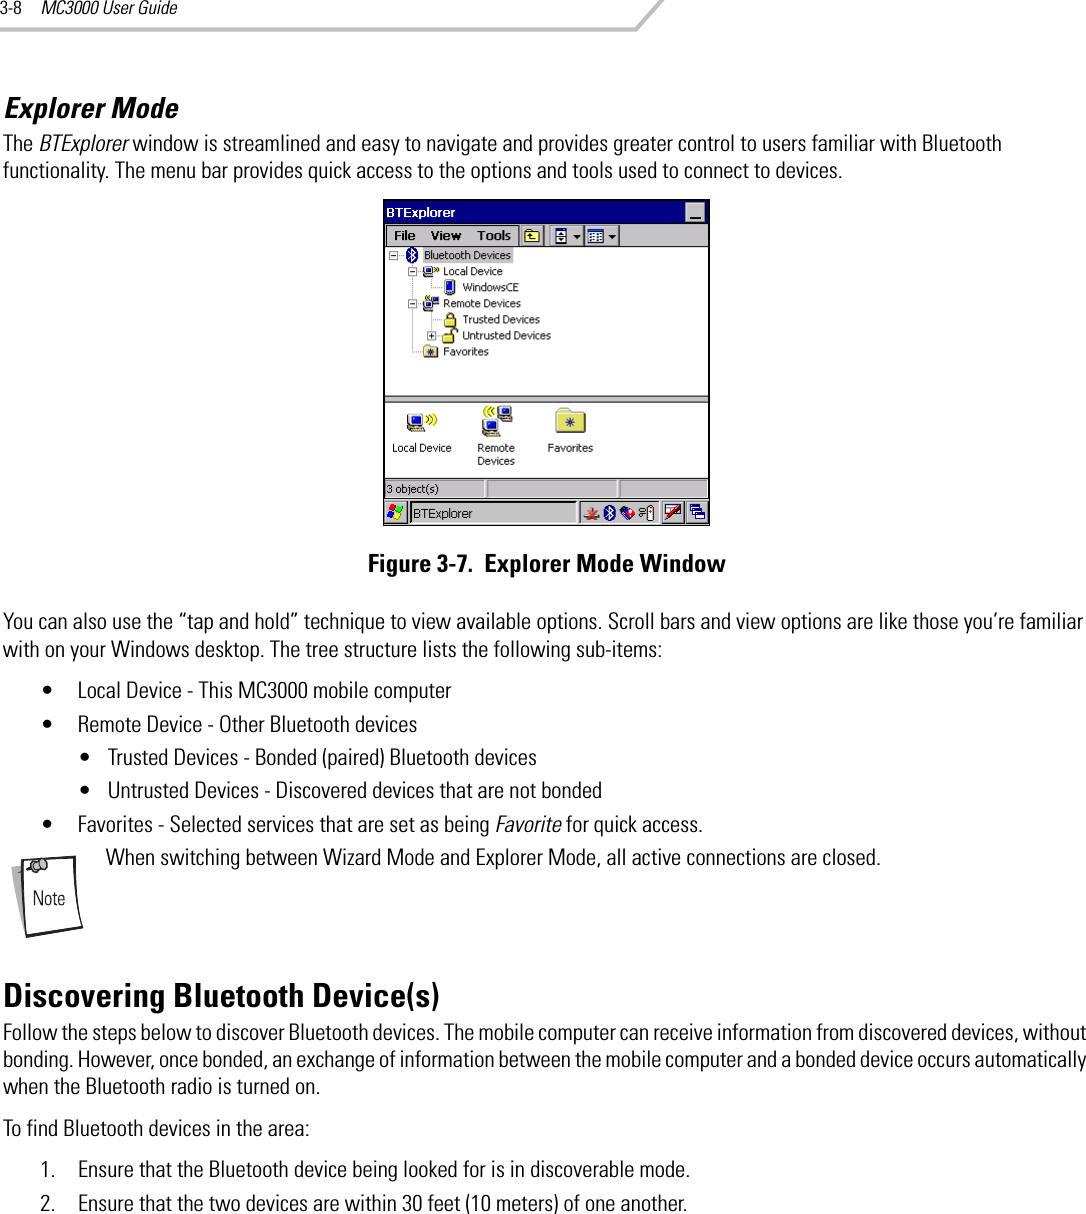 MC3000 User Guide3-8Explorer ModeThe BTExplorer window is streamlined and easy to navigate and provides greater control to users familiar with Bluetooth functionality. The menu bar provides quick access to the options and tools used to connect to devices.Figure 3-7.  Explorer Mode WindowYou can also use the “tap and hold” technique to view available options. Scroll bars and view options are like those you’re familiar with on your Windows desktop. The tree structure lists the following sub-items:• Local Device - This MC3000 mobile computer• Remote Device - Other Bluetooth devices• Trusted Devices - Bonded (paired) Bluetooth devices• Untrusted Devices - Discovered devices that are not bonded• Favorites - Selected services that are set as being Favorite for quick access.When switching between Wizard Mode and Explorer Mode, all active connections are closed. Discovering Bluetooth Device(s)Follow the steps below to discover Bluetooth devices. The mobile computer can receive information from discovered devices, without bonding. However, once bonded, an exchange of information between the mobile computer and a bonded device occurs automatically when the Bluetooth radio is turned on.To find Bluetooth devices in the area:1. Ensure that the Bluetooth device being looked for is in discoverable mode.2. Ensure that the two devices are within 30 feet (10 meters) of one another.